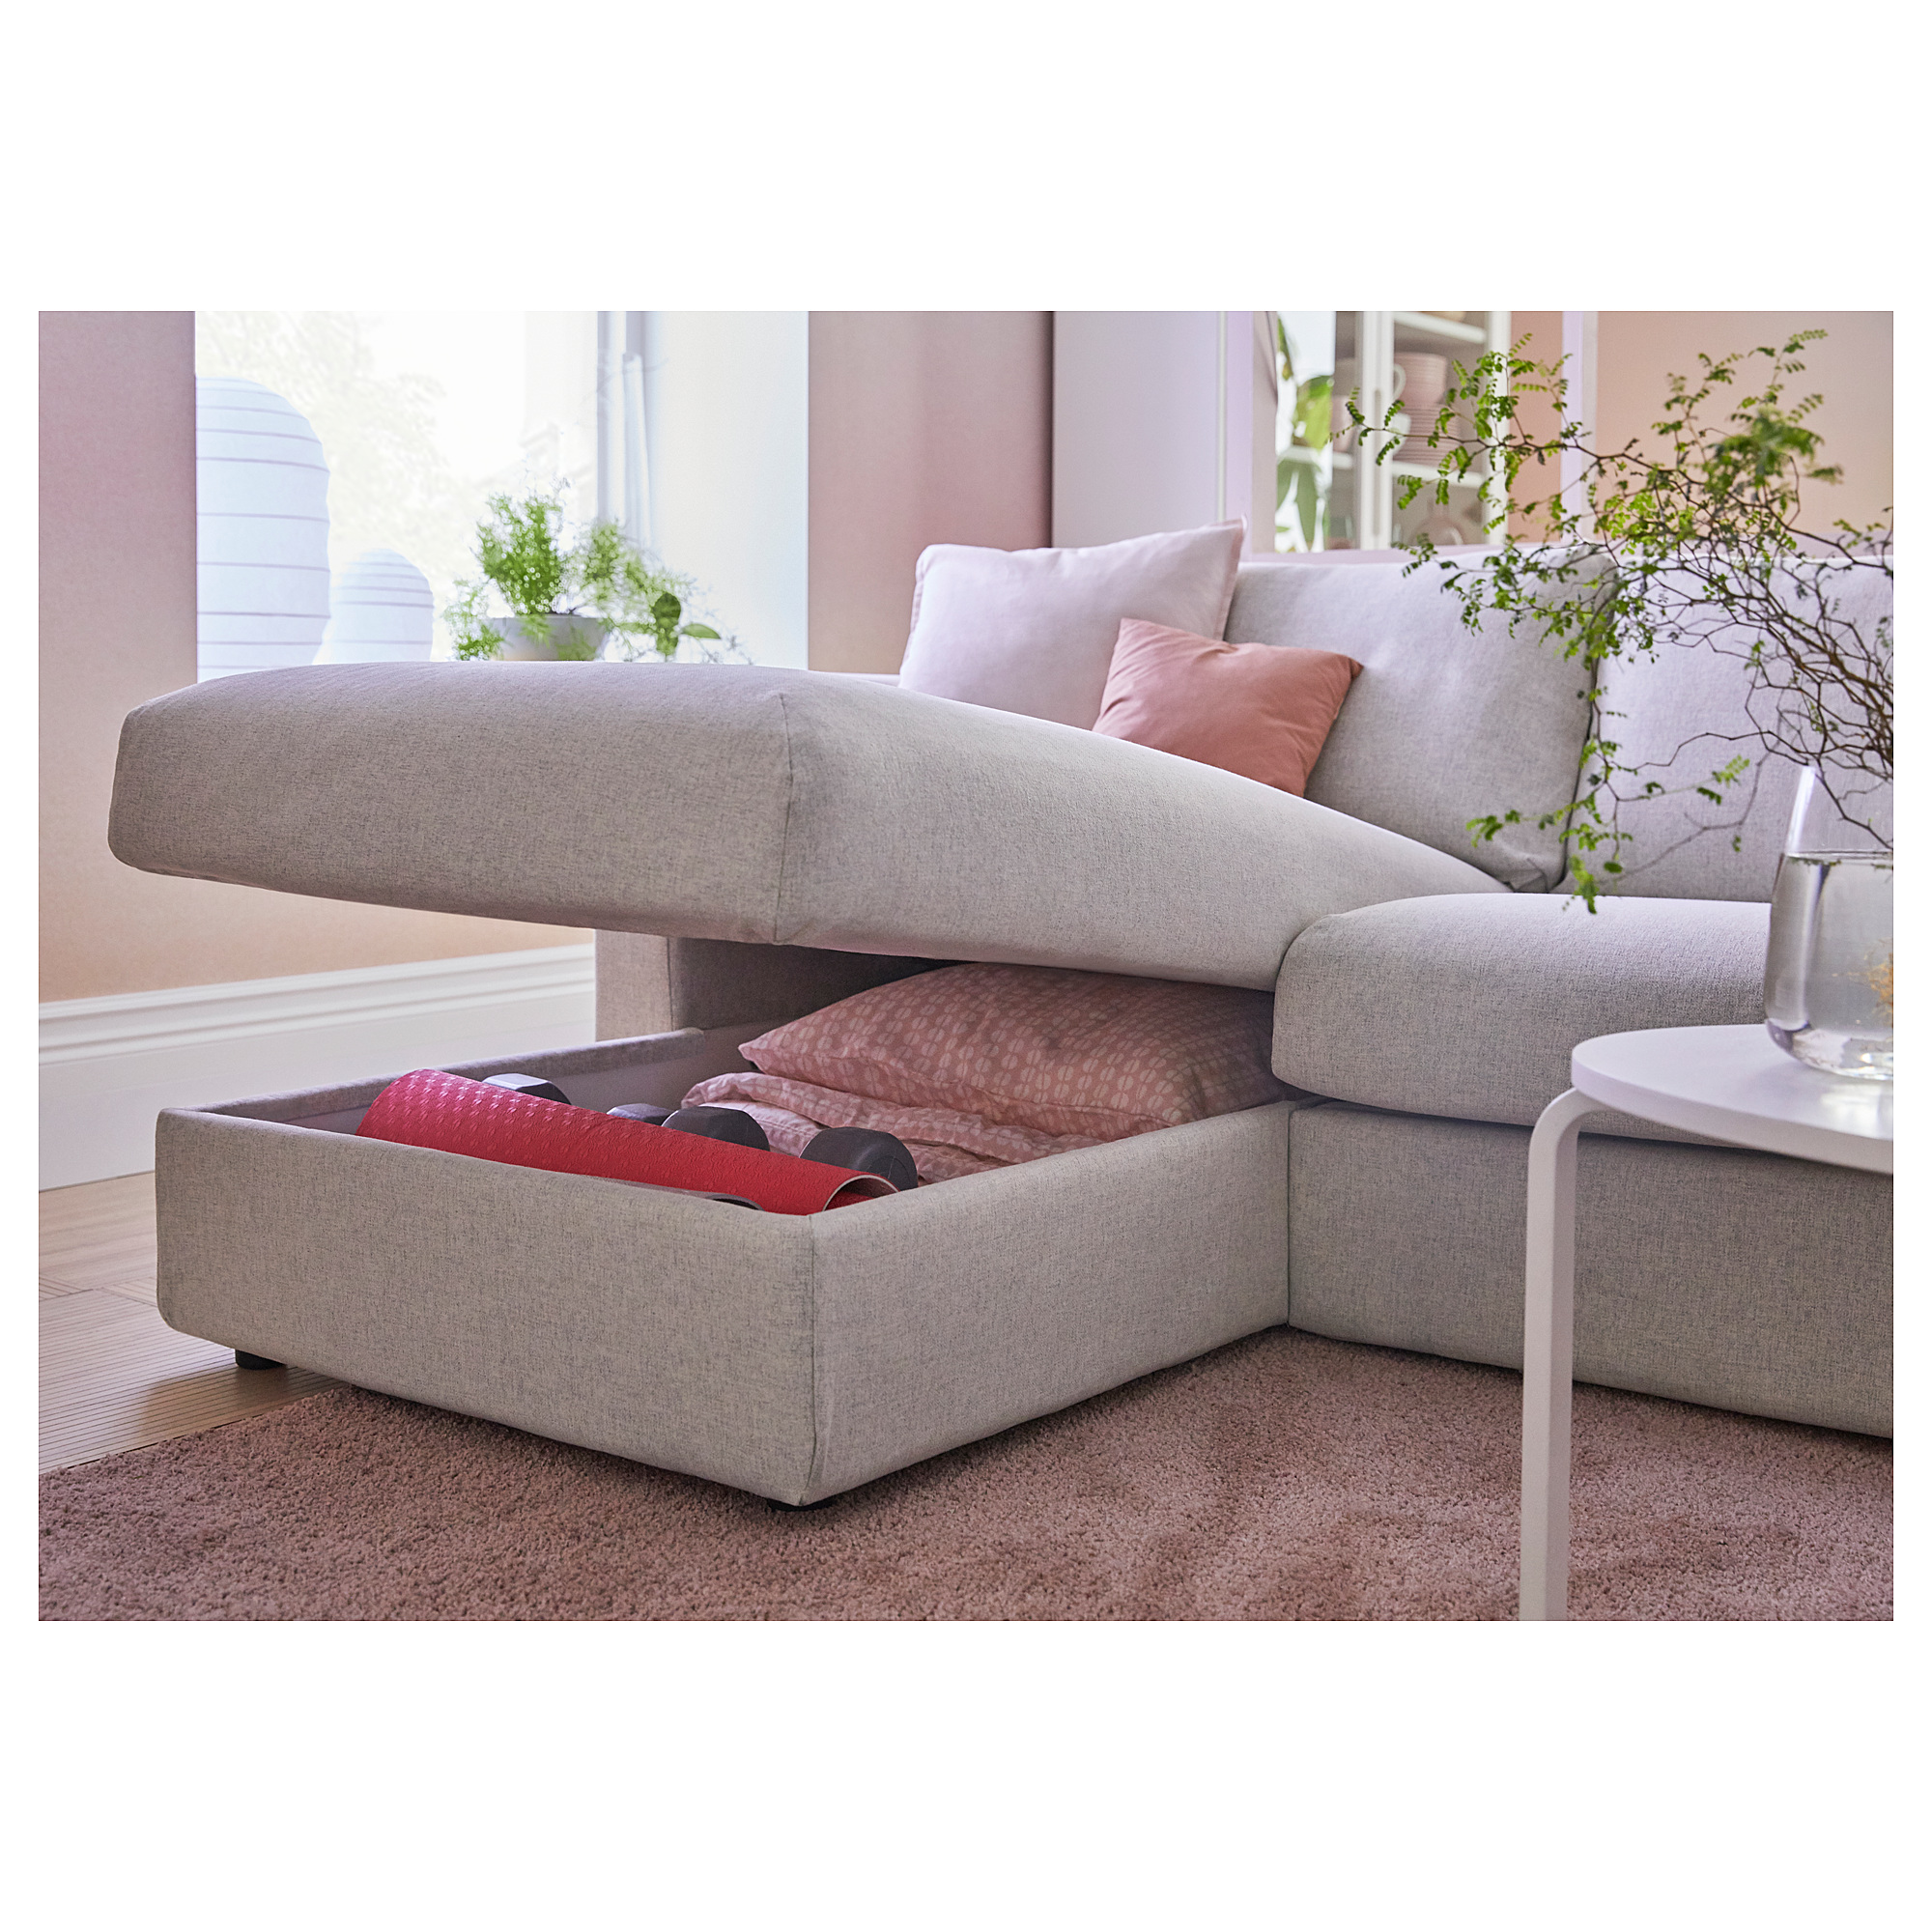 VIMLE 4-seat sofa with chaise longue